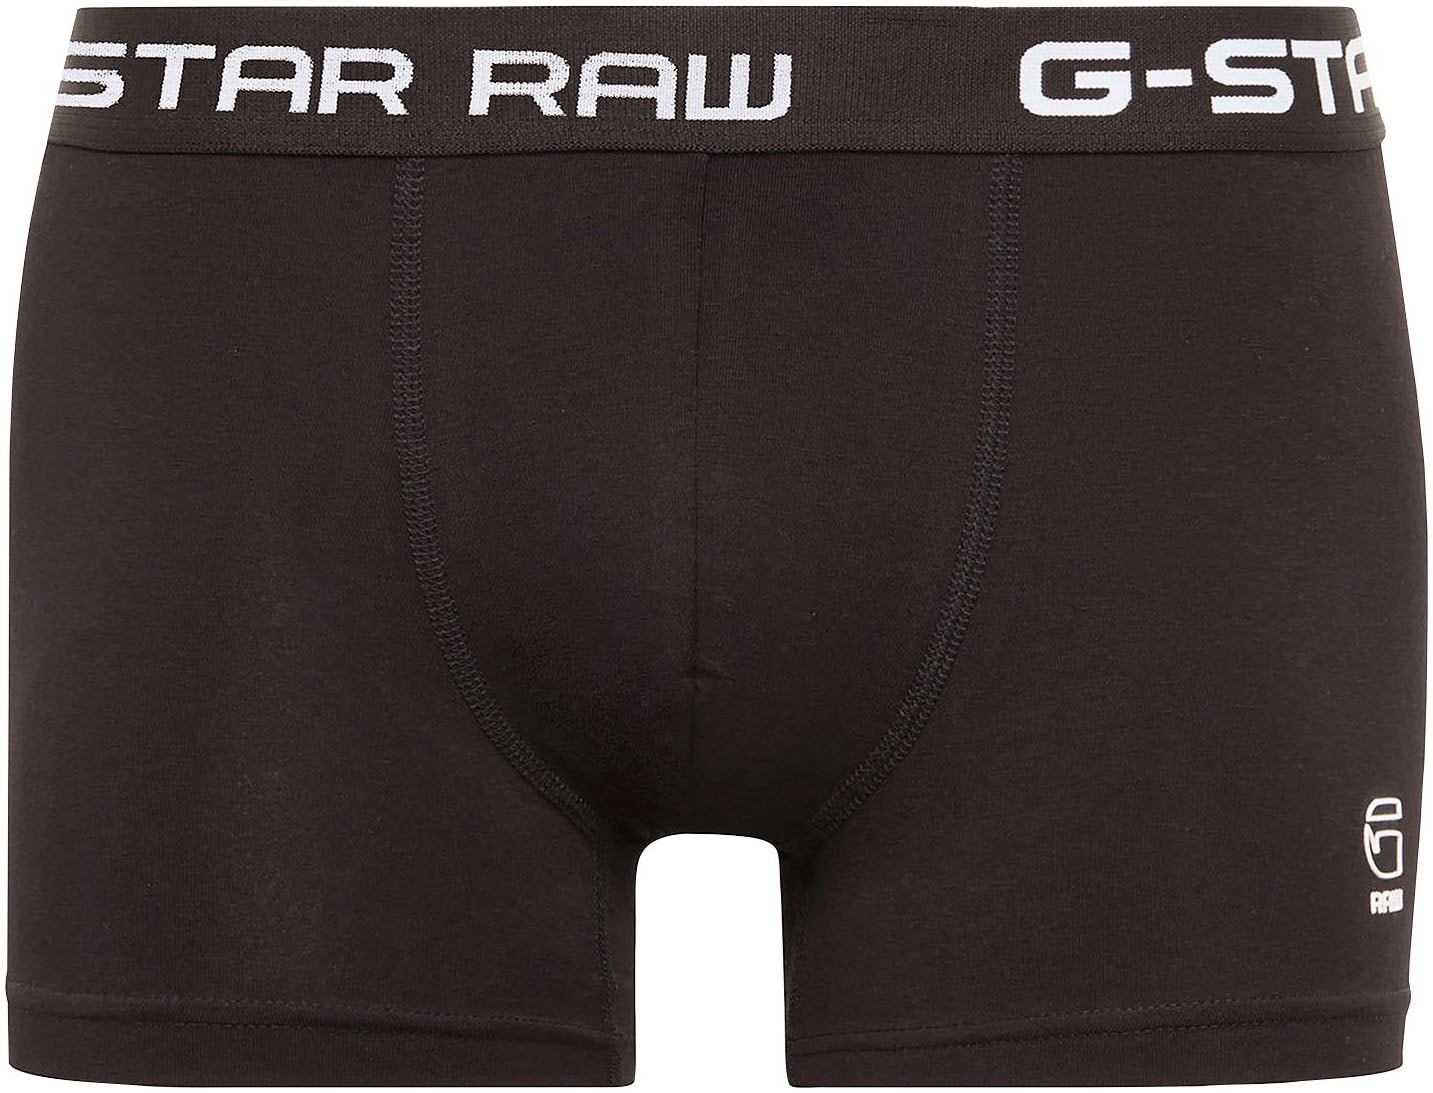 G-Star RAW Boxershorts »Classic trunk 3 pack«, (3 St., 3er-Pack)